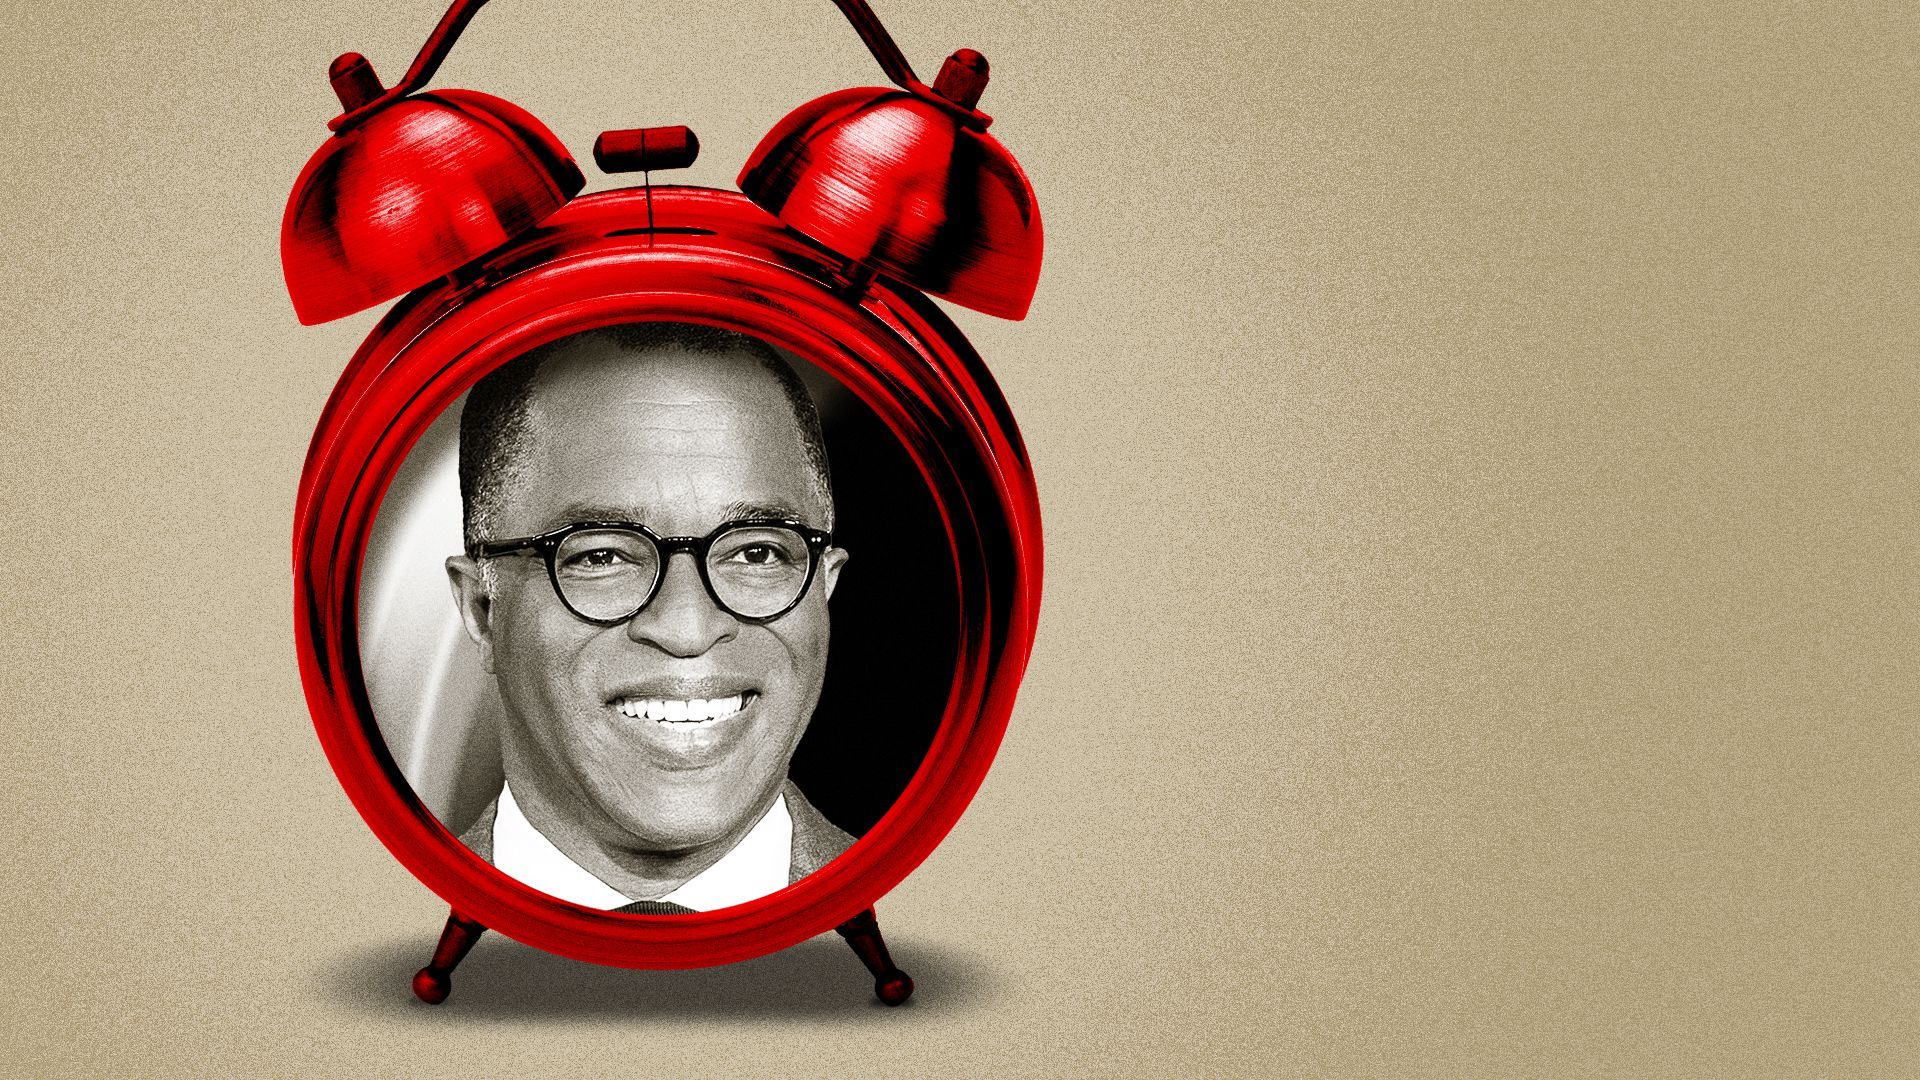 Photo illustration collage of Jonathan Capehart inside a red alarm clock.